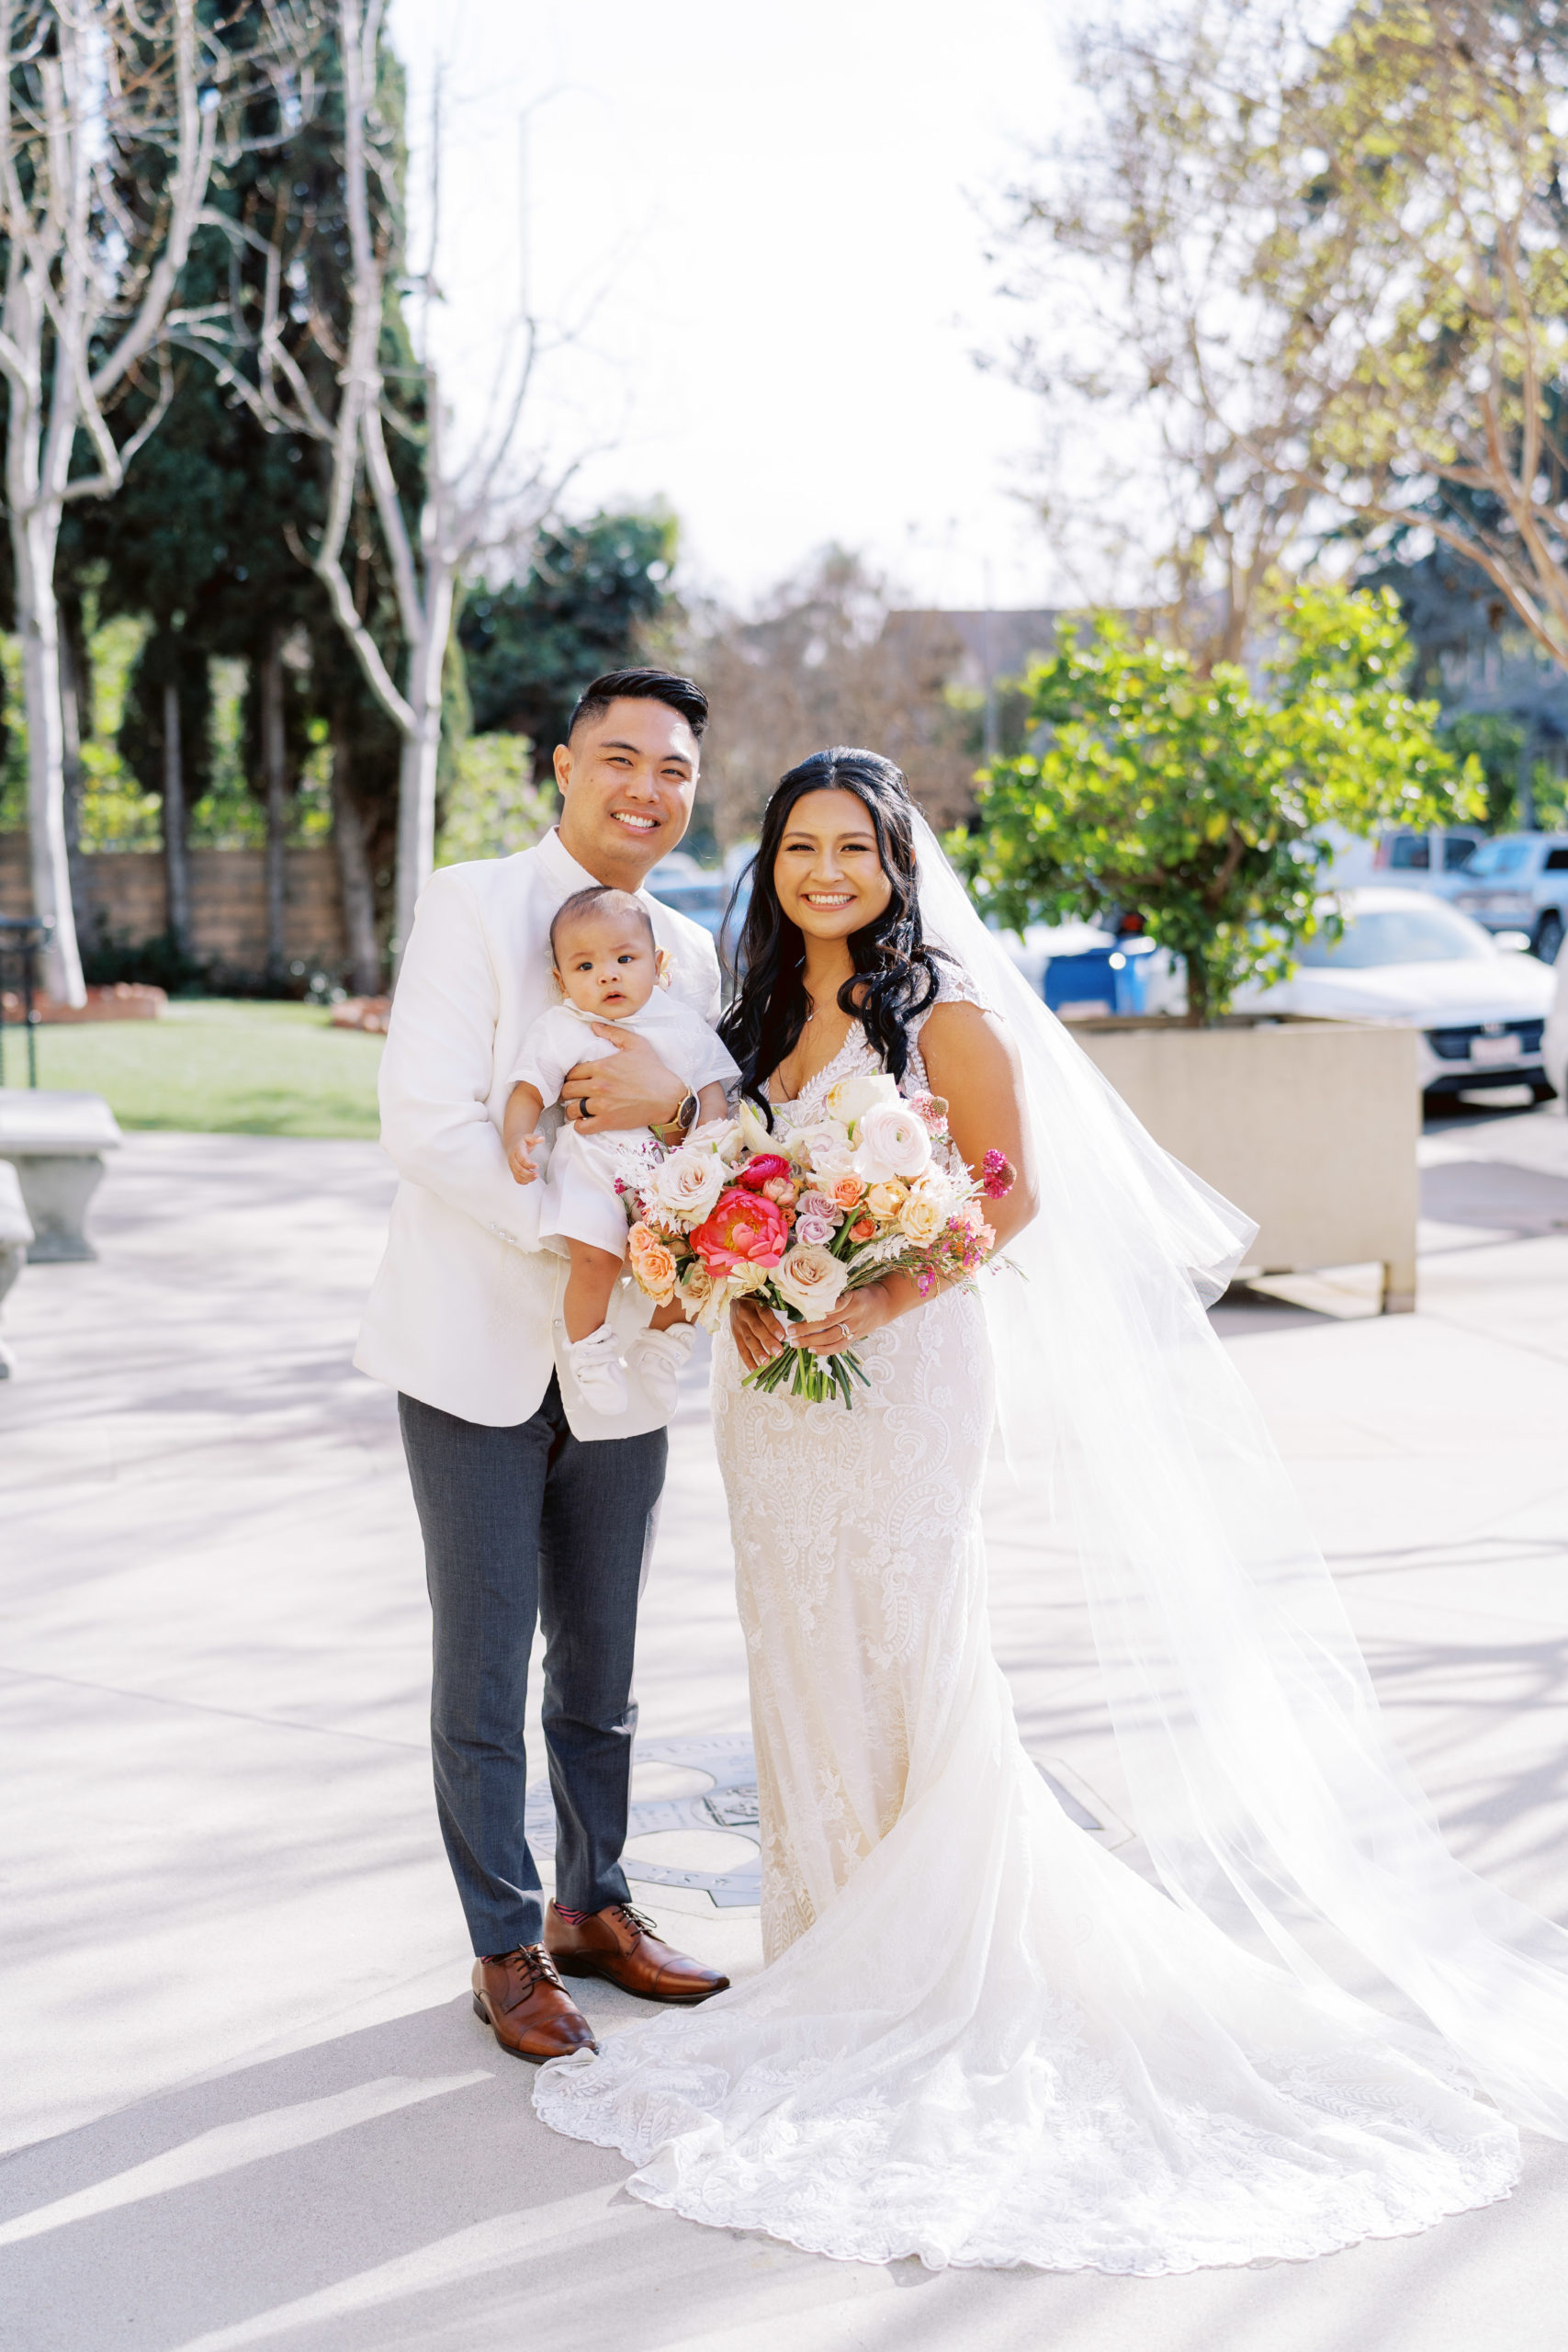 bride in lace wedding dress and bright bridal bouquet stands with groom in white wedding attire while holding baby during wedding portrait shots